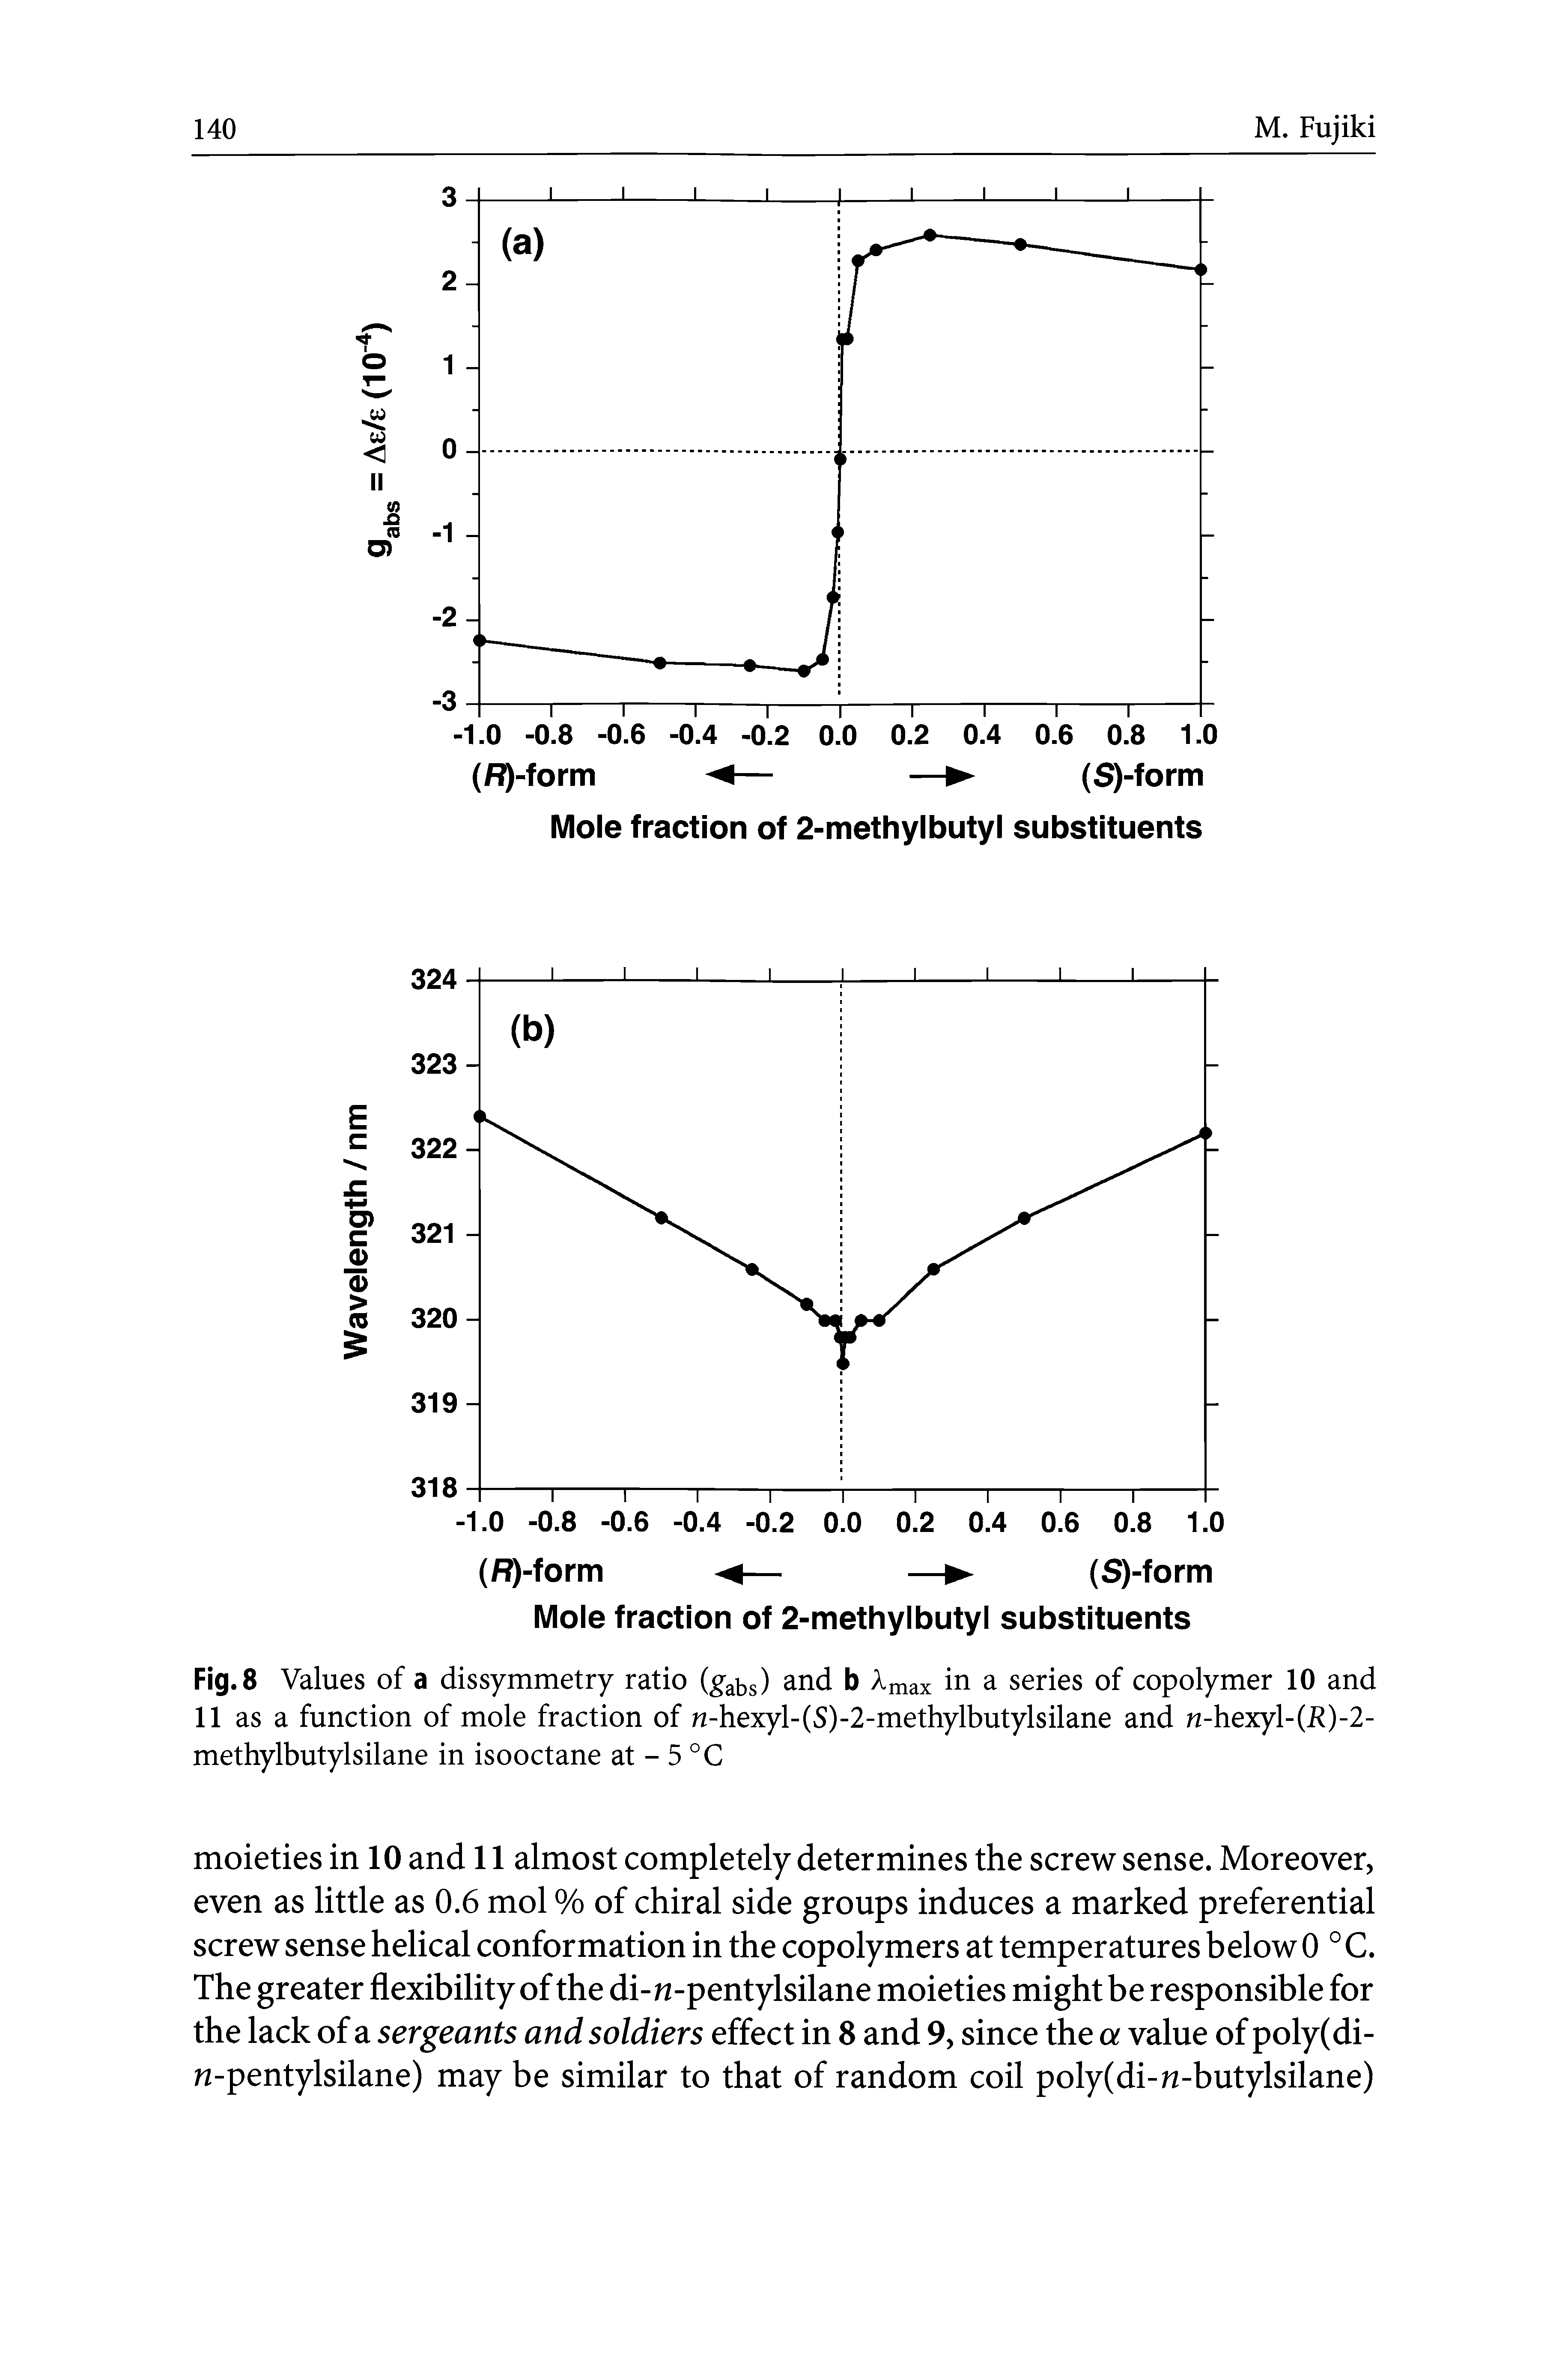 Fig. 8 Values of a dissymmetry ratio (gabs) and b Amax in a series of copolymer 10 and 11 as a function of mole fraction of n-hexyl-(S)-2-methylbutylsilane and w-hexyl-CR)-2-methylbutylsilane in isooctane at - 5 °C...